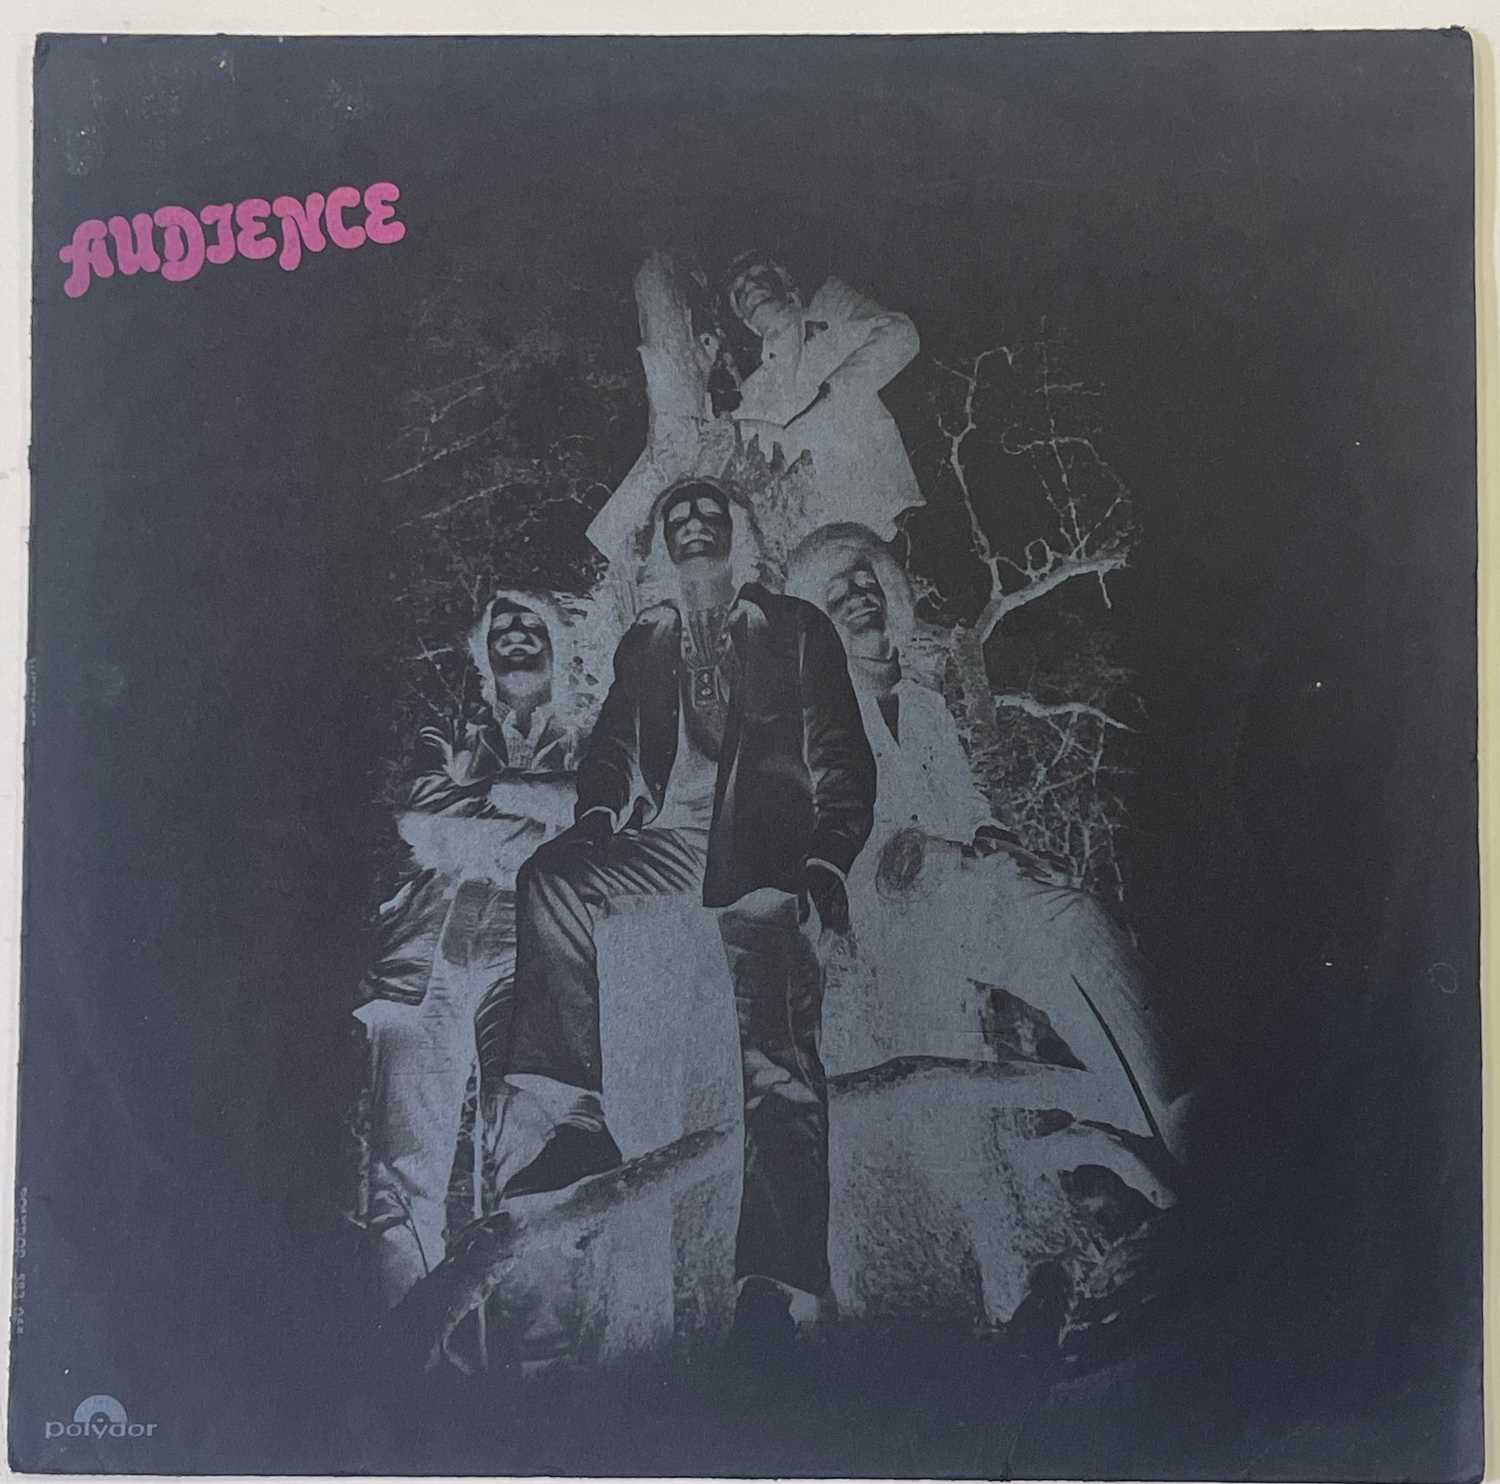 AUDIENCE - AUDIENCE LP (ORIGINAL UK COPY WITH WITHDRAWN 'NEGATIVE' SLEEVE - POLYDOR 583 065) - Image 3 of 3